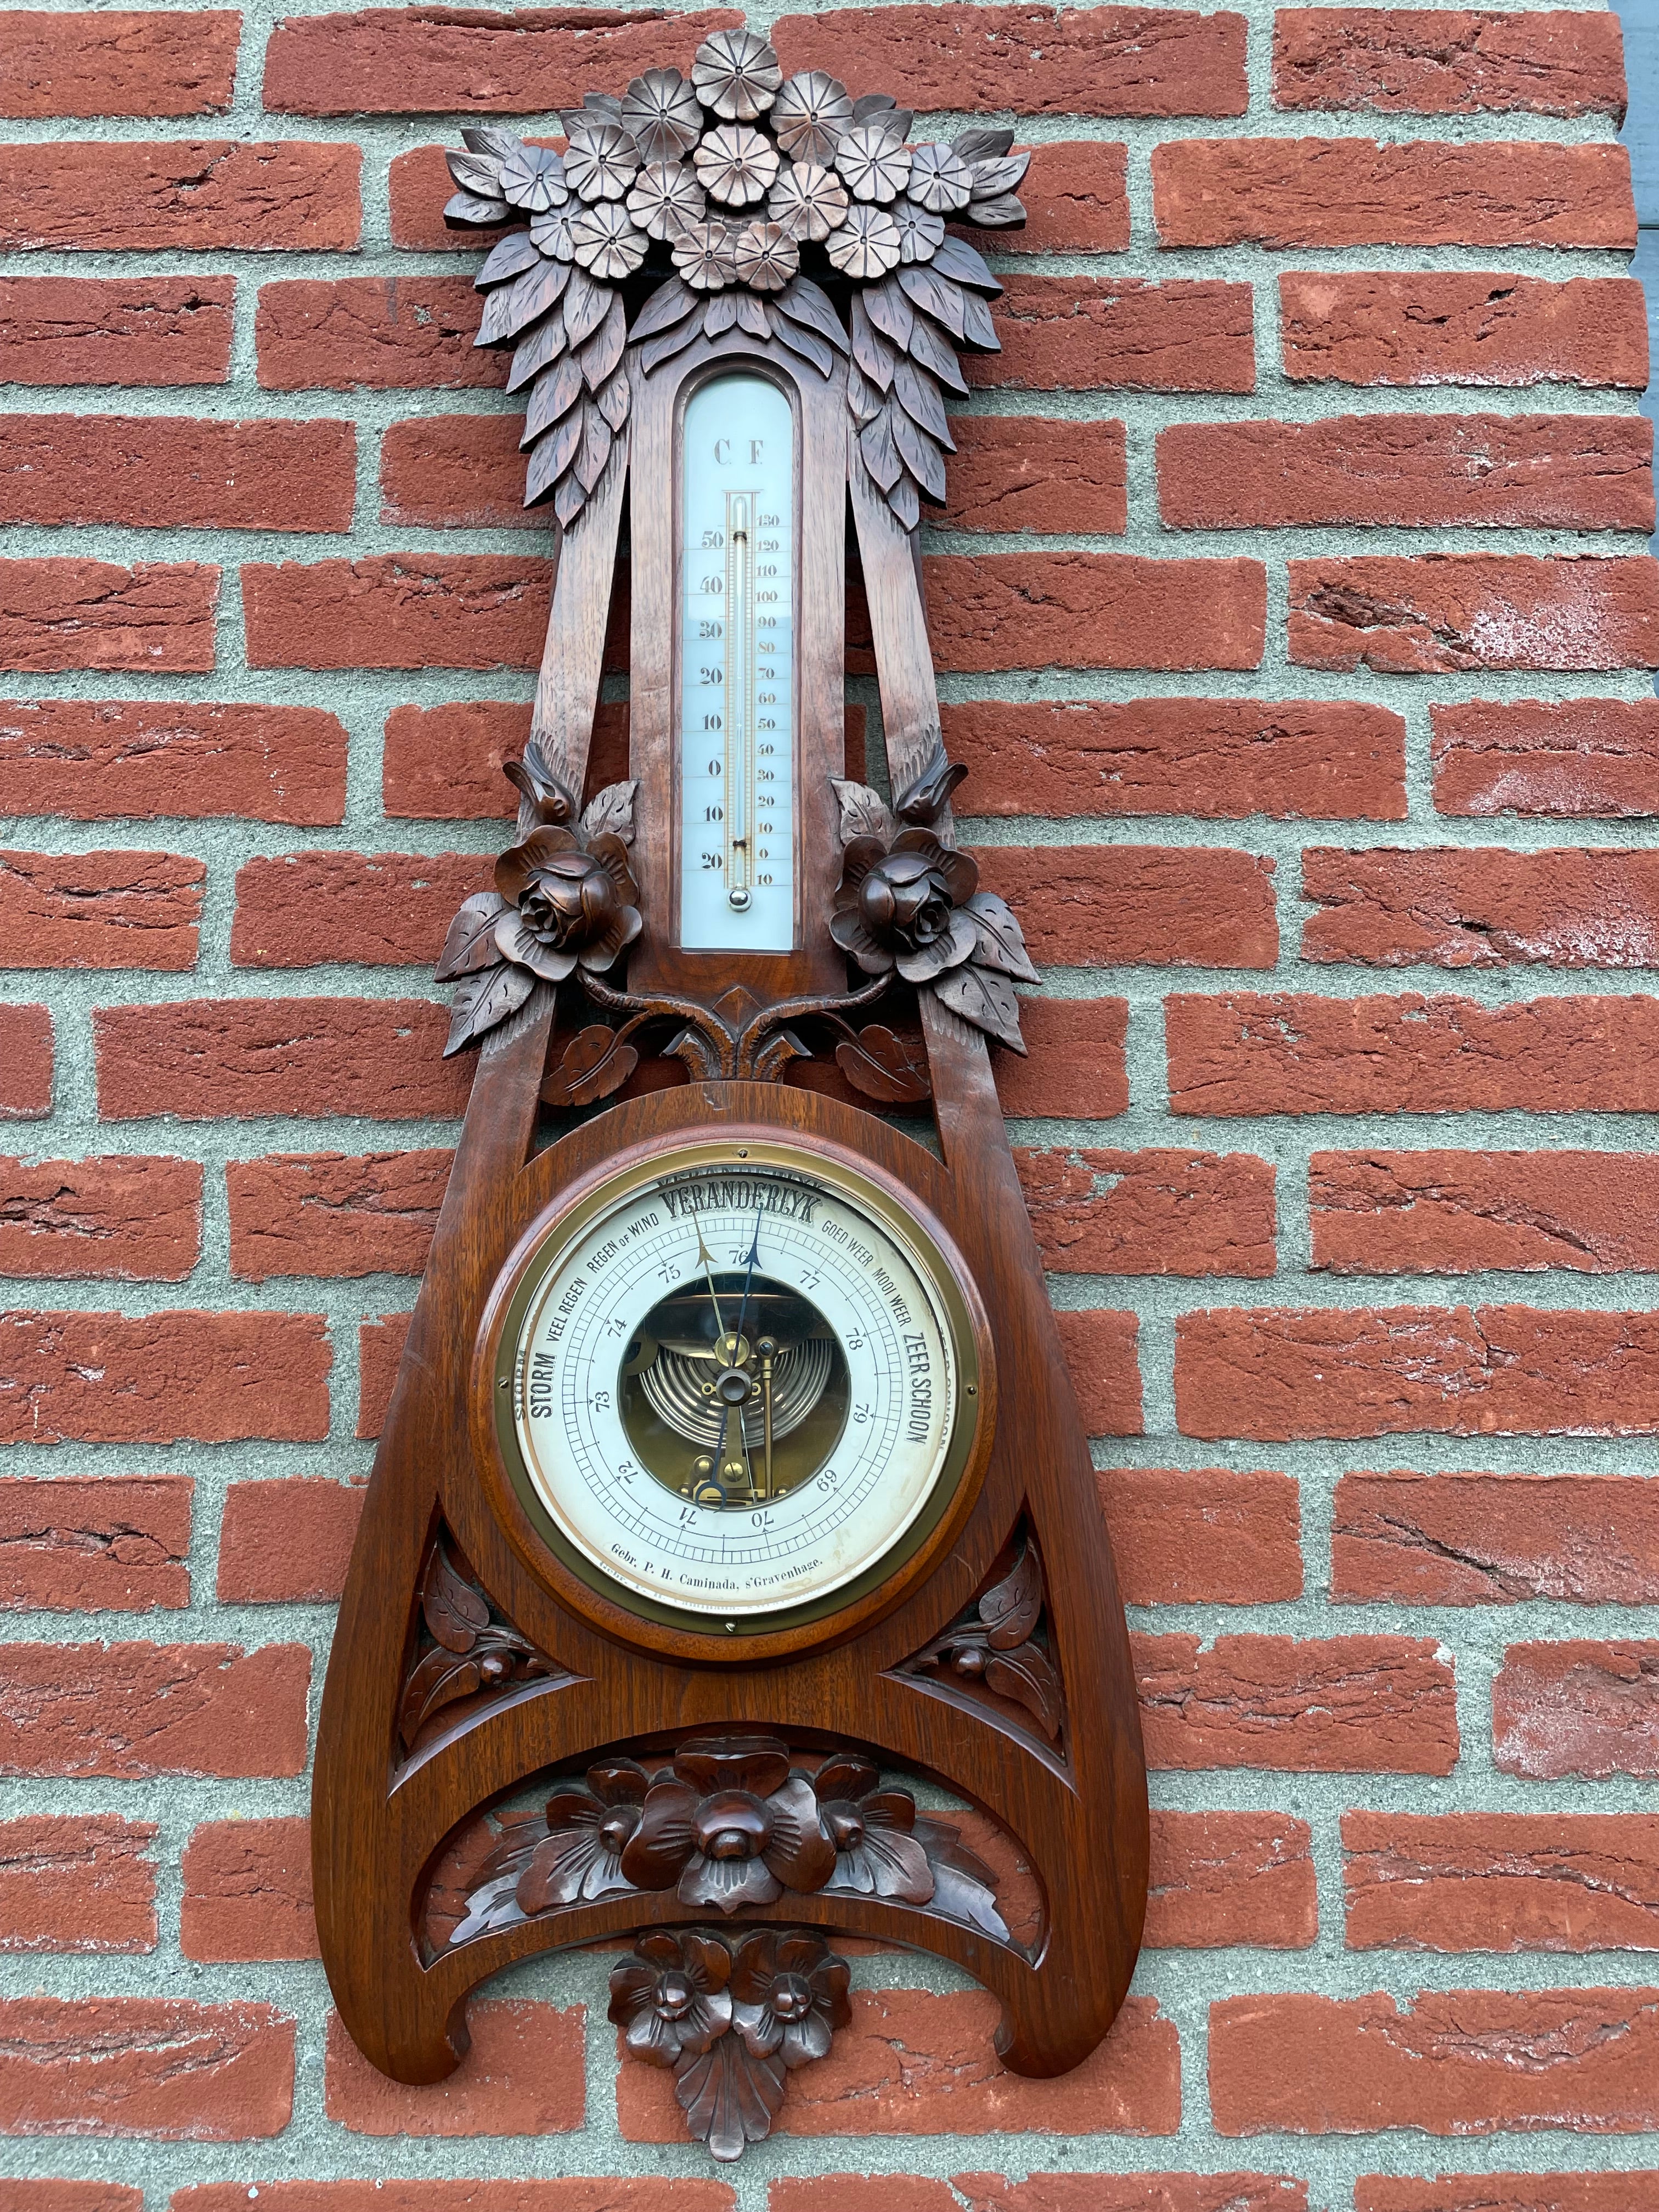 Stunning design and top quality executed Arts & Crafts barometer.

This early 1900s, hand carved out of one piece of nutwood, wall barometer has everything that makes an antique worthwhile. The quality of the workmanship is second to none. The